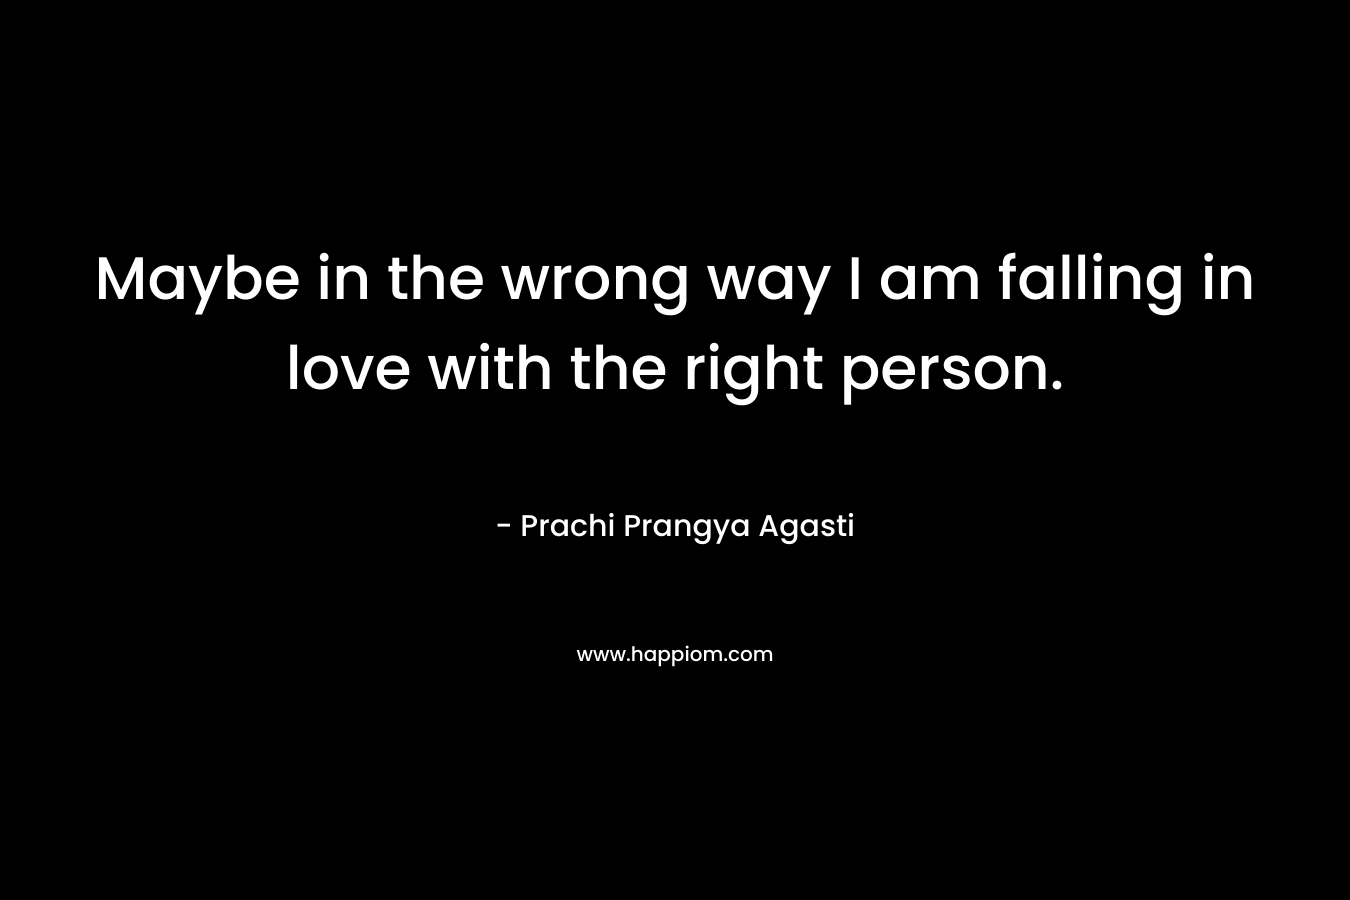 Maybe in the wrong way I am falling in love with the right person. – Prachi Prangya Agasti